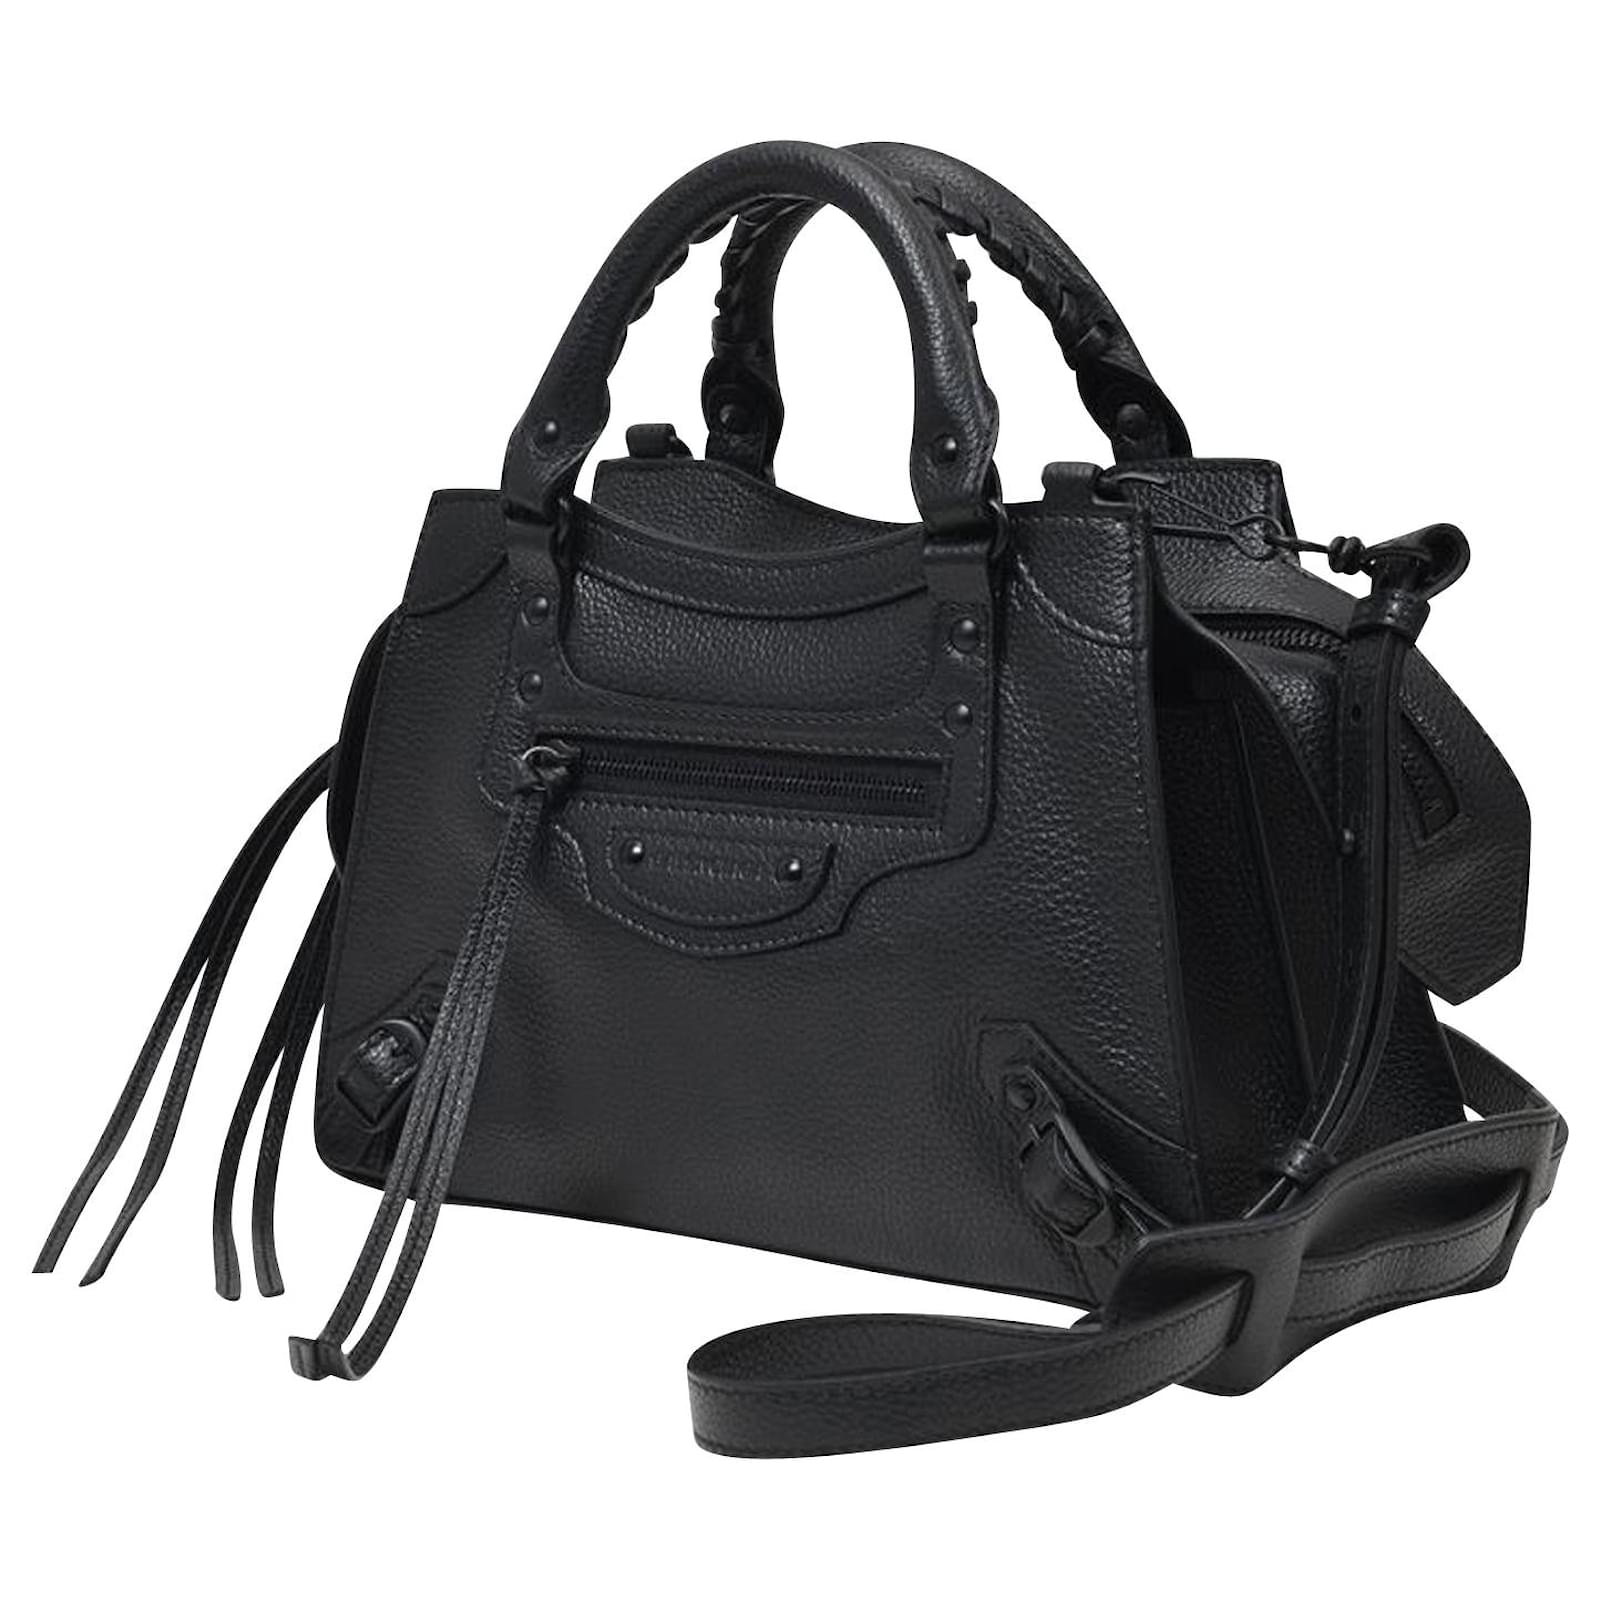 Neo Classic City XS Bag in Black Leather